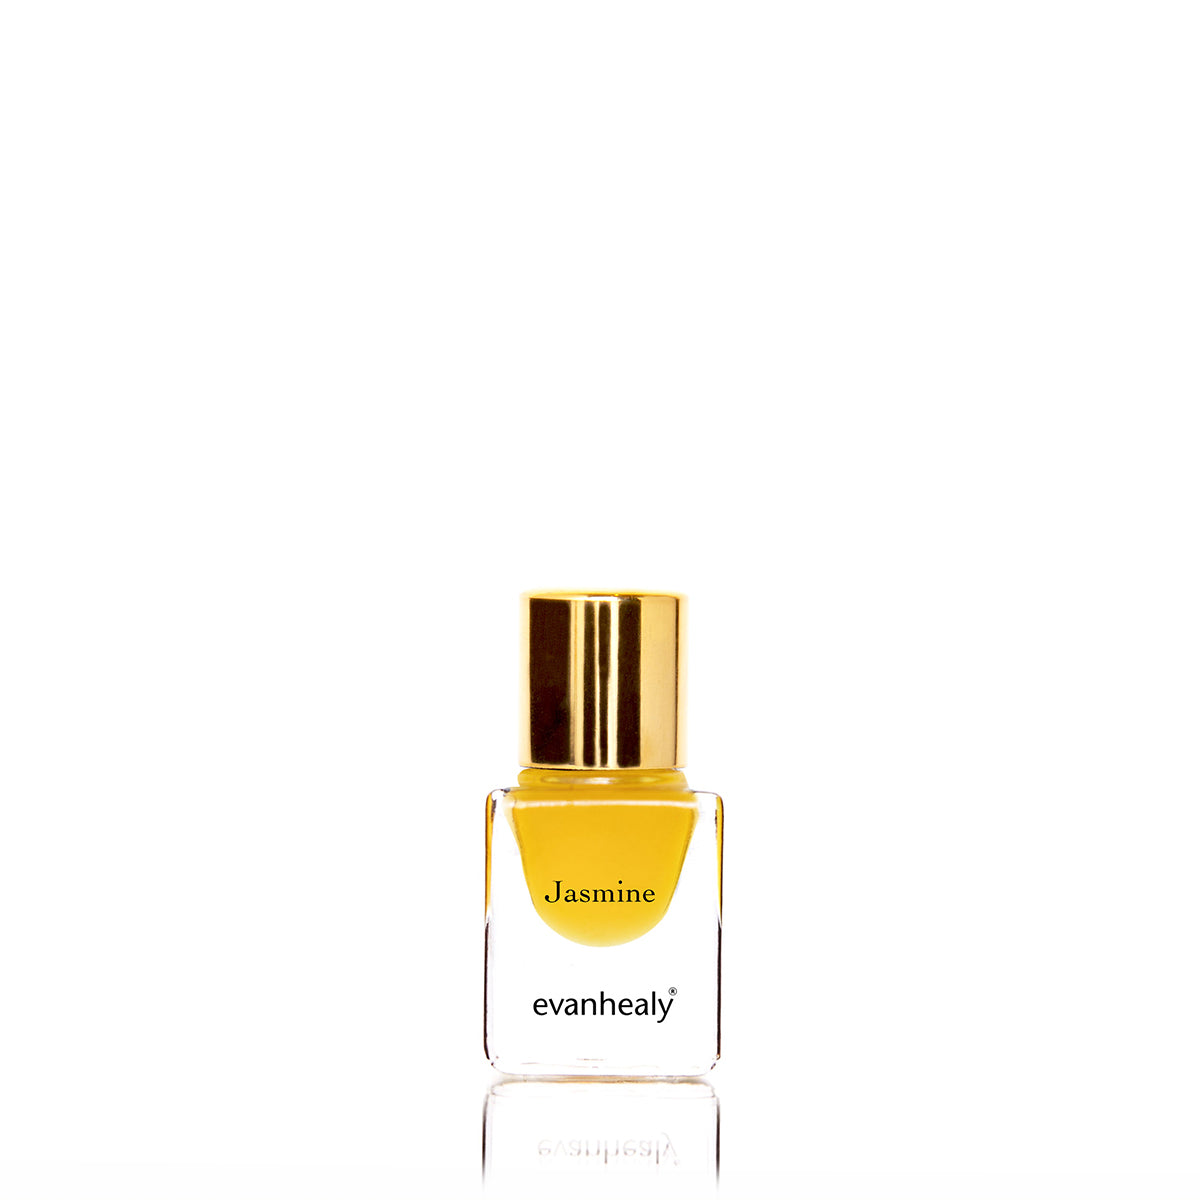 evanhealy jasmine perfume made with whole essential oil